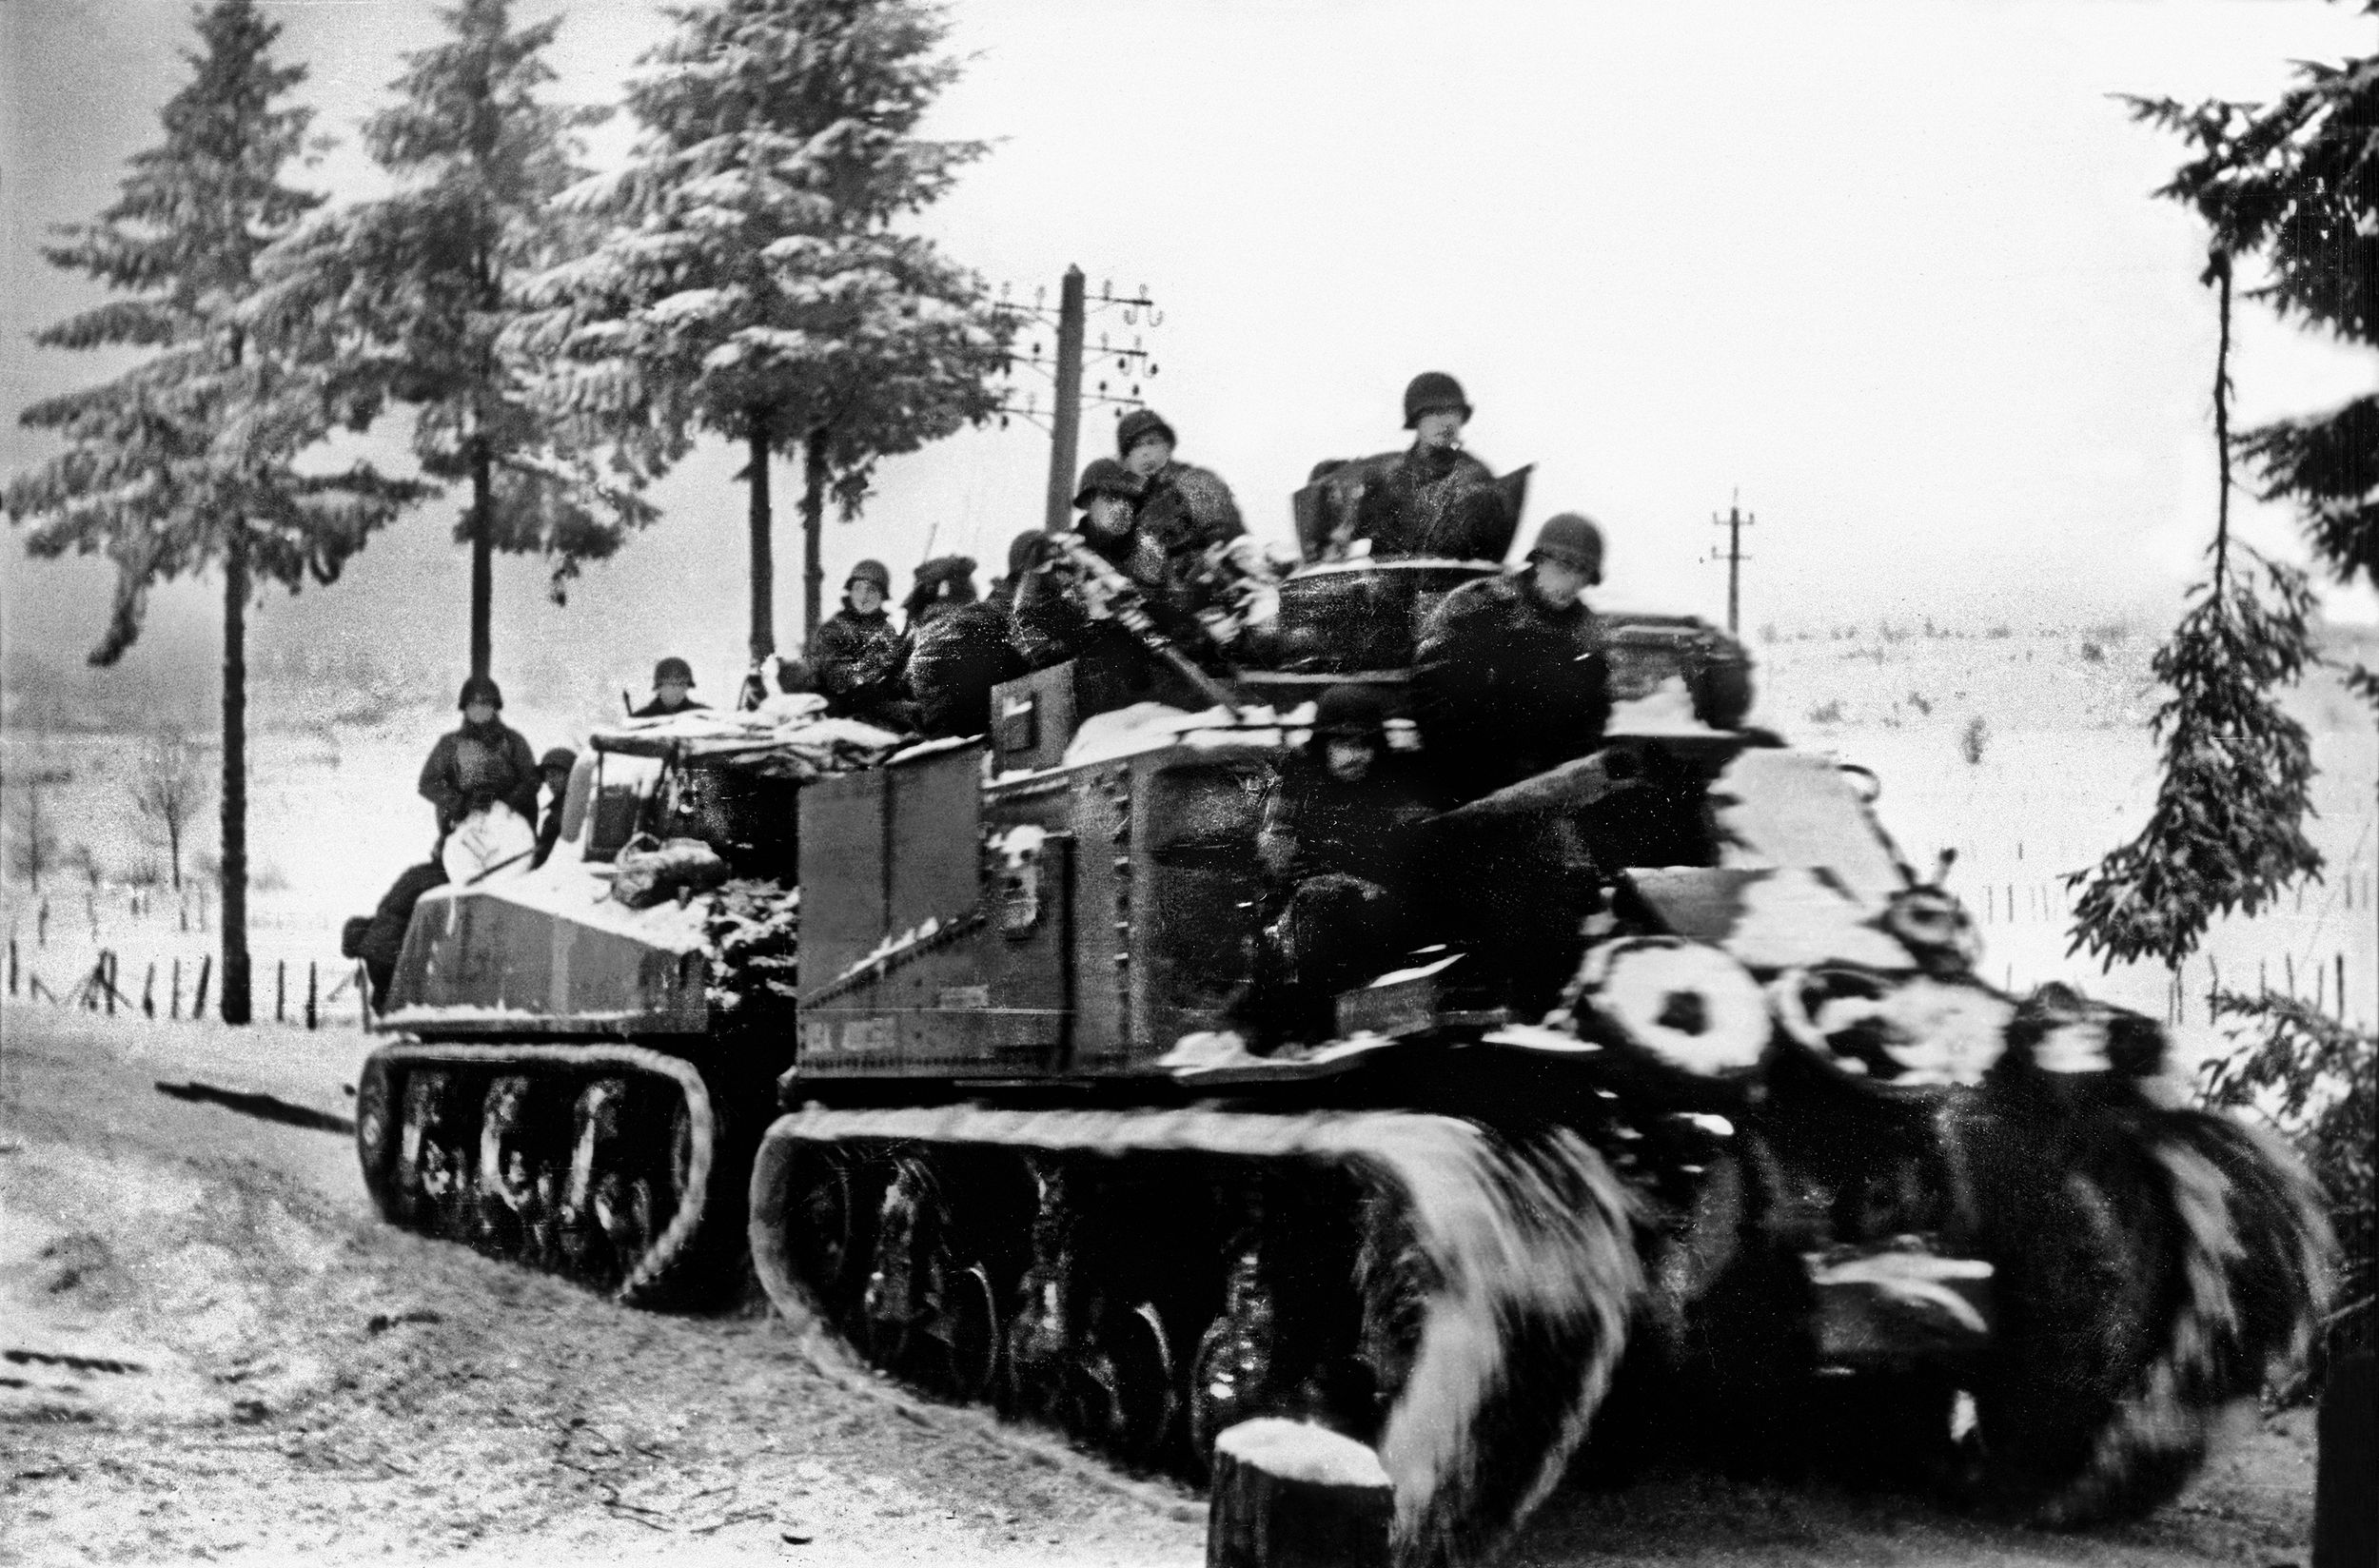 American soldiers hitch a ride on a pair of armored vehicles, one of them an M4 Sherman tank, during the Battle of the Bulge. On the afternoon of the first day of the German offensive, the American 707th Tank Battalion received orders to attack south along Skyline Drive and reached the village of Hosingen to bolster the defenders of Company K, 110th Infantry Regiment.